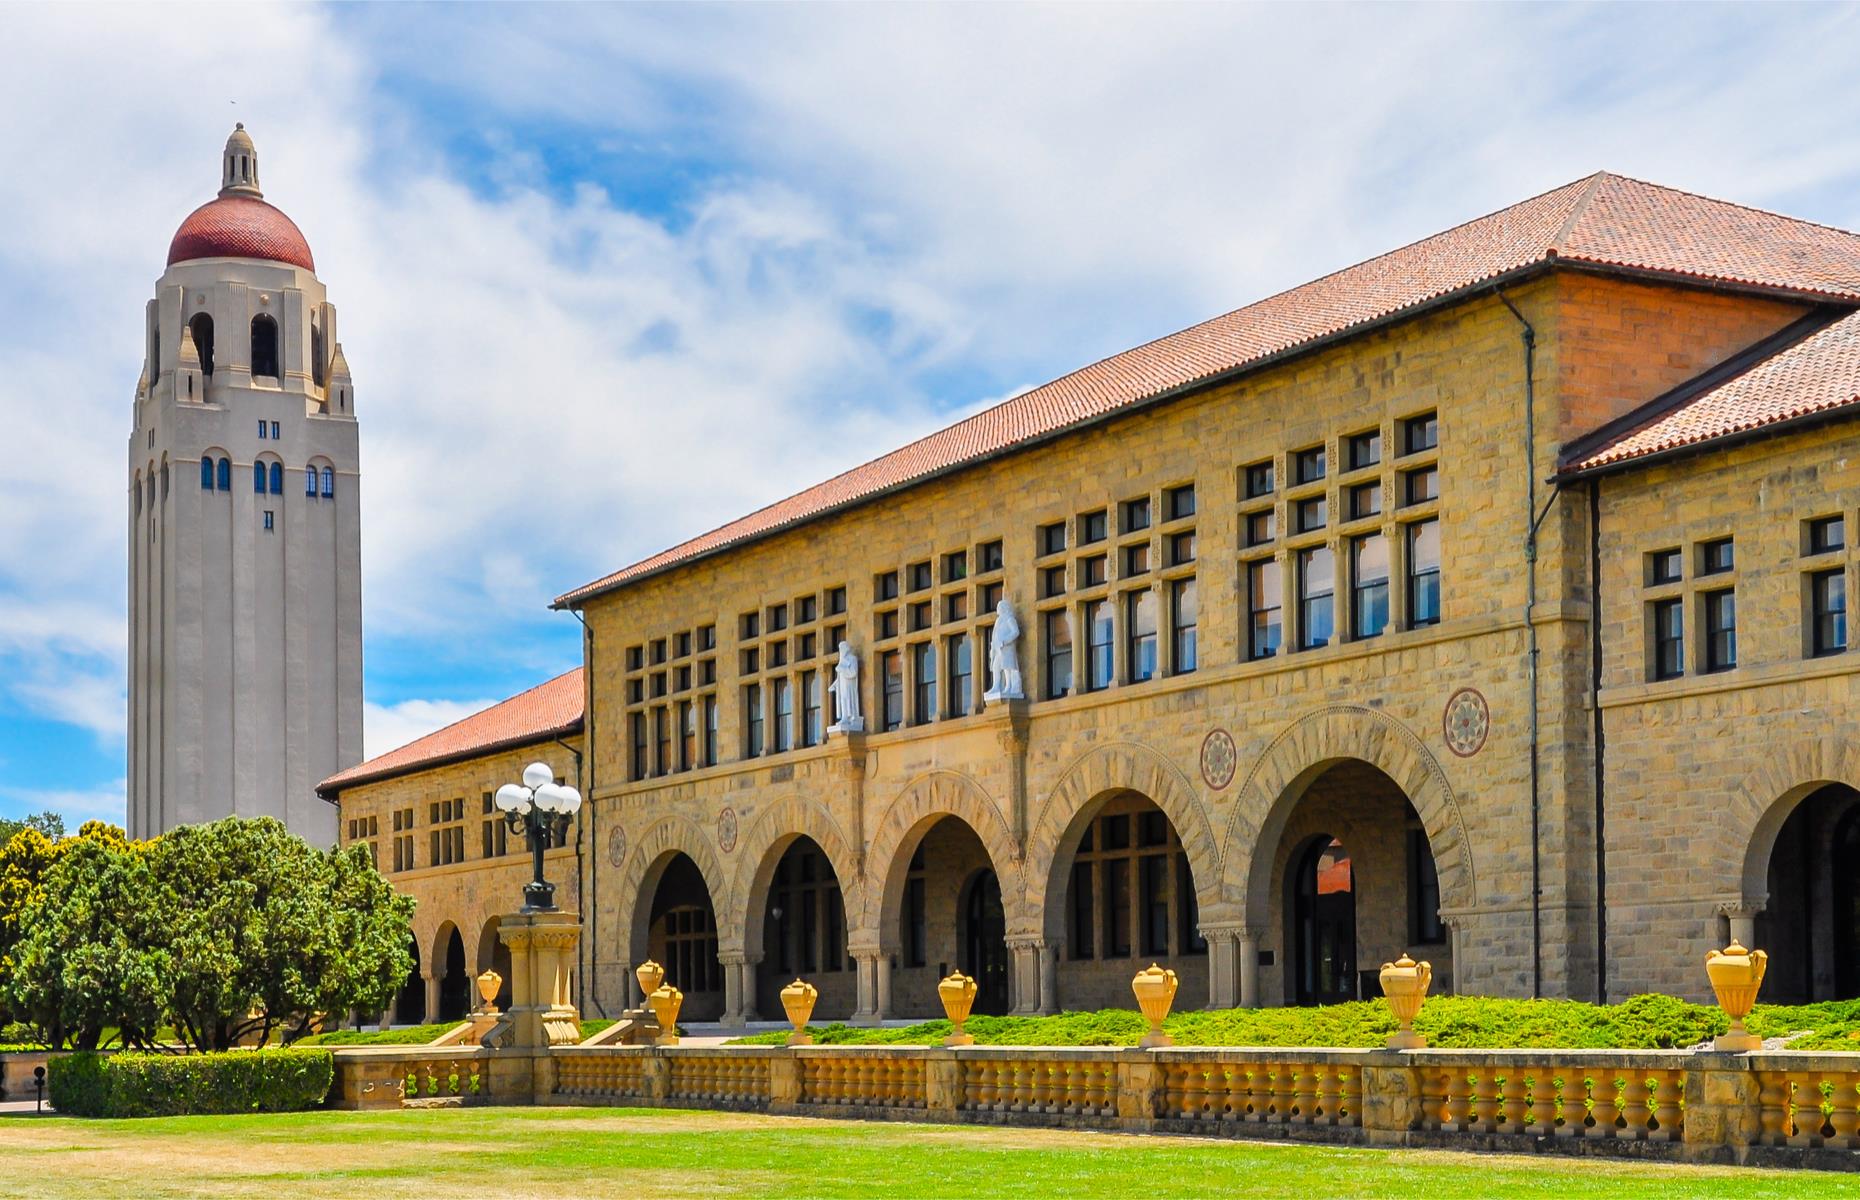 Mukesh leaves Stanford to join the family business 